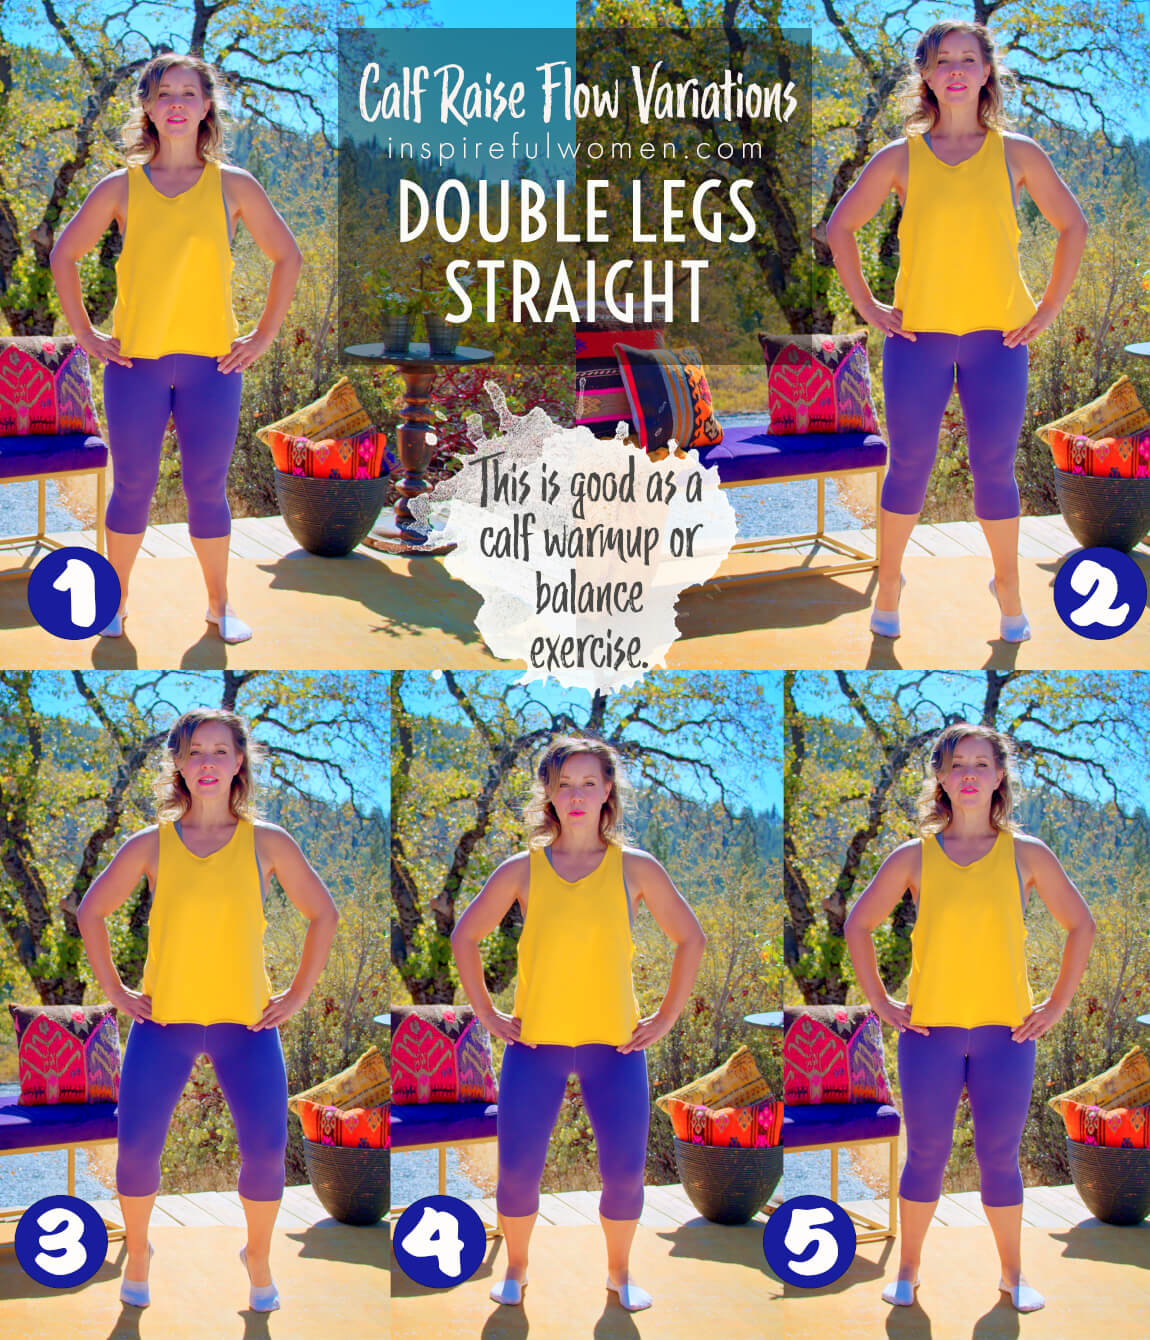 straight-double-legs-calf-raise-flow-standing-leg-warmup-exercise-variation